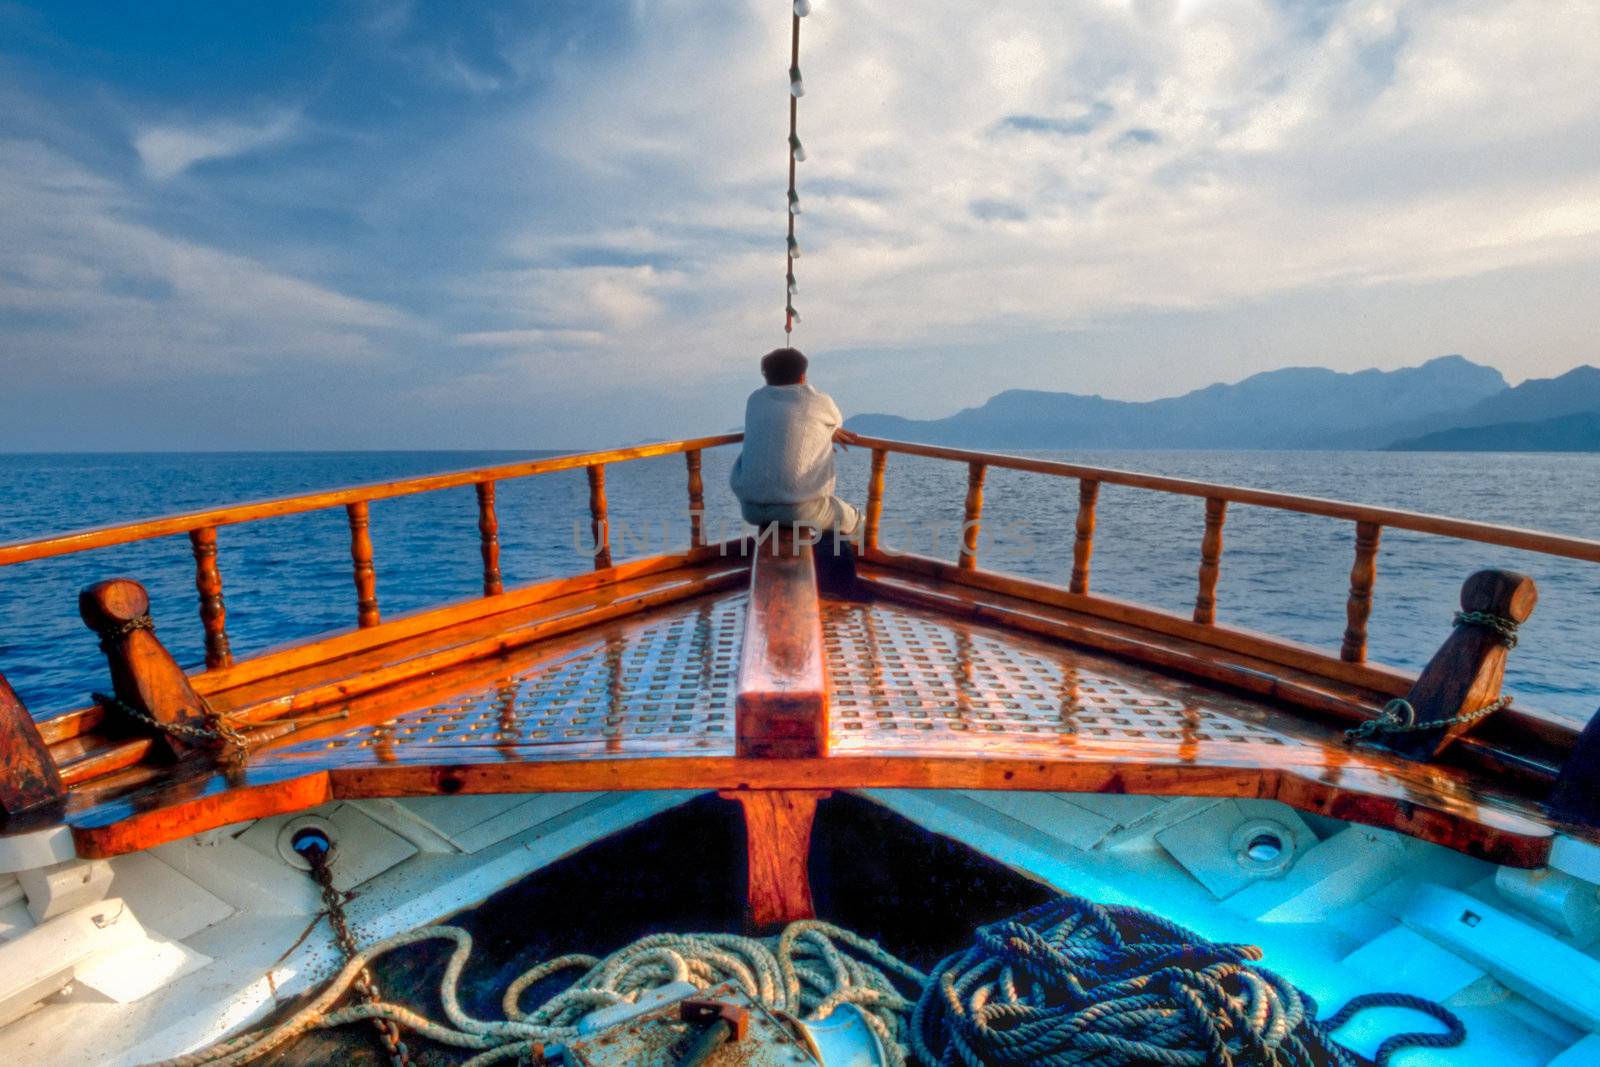 Man day-dreaming at the bow of traditional Greek vessel cruising the aegean sea.